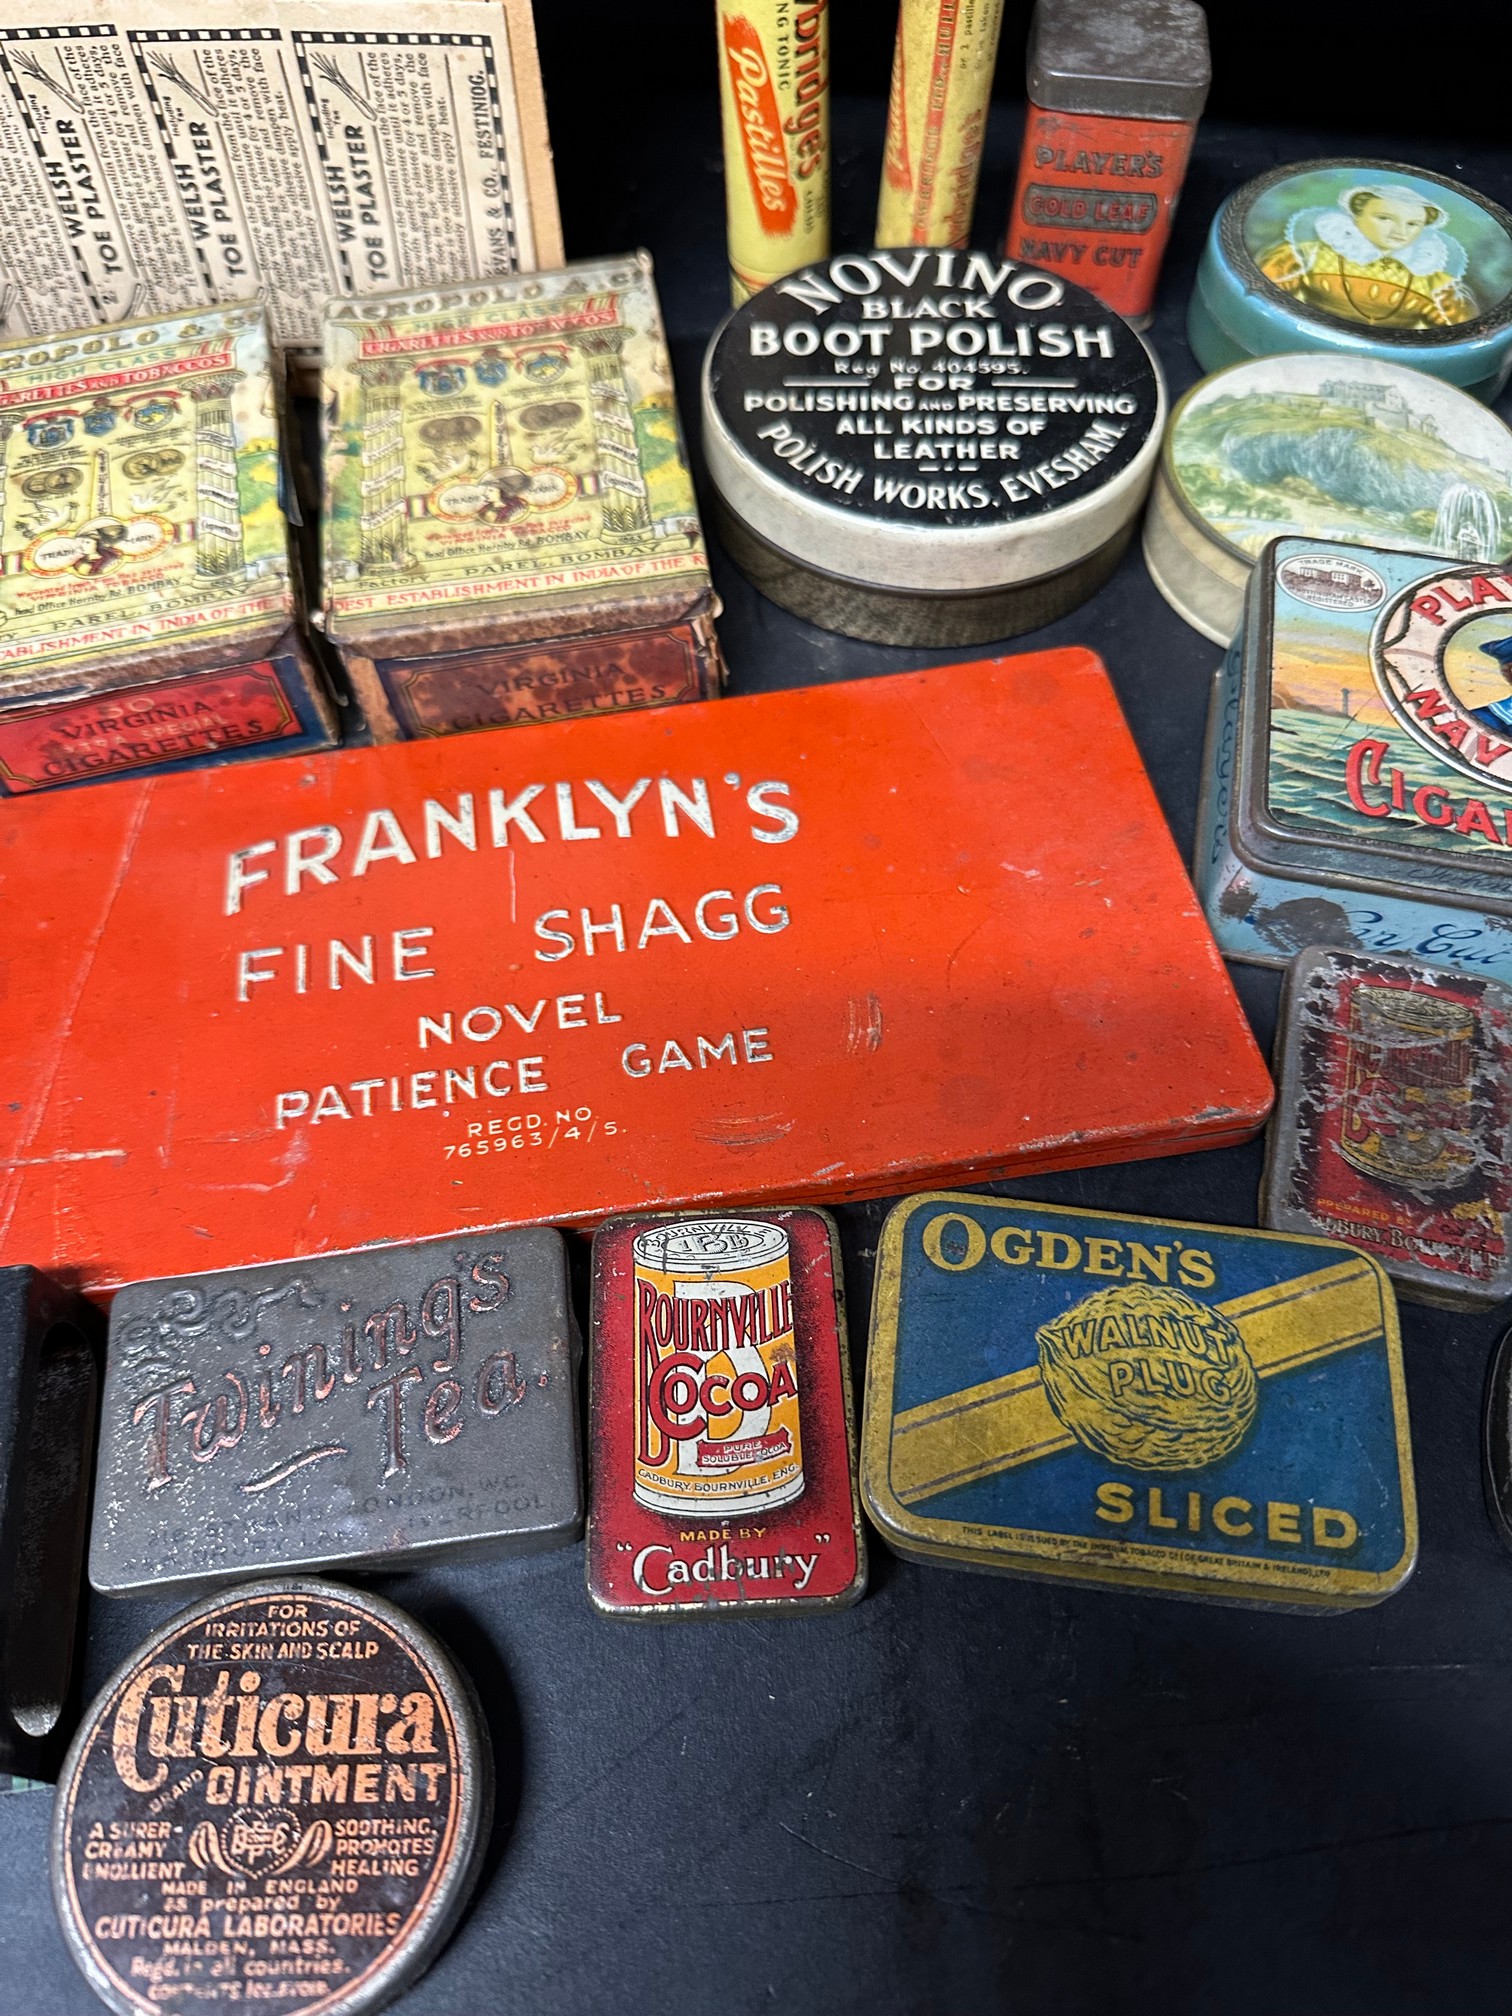 A selection of tins, a match case, a Franklyn's Fine Shagg novel patience game, toe plaster point of - Bild 3 aus 5